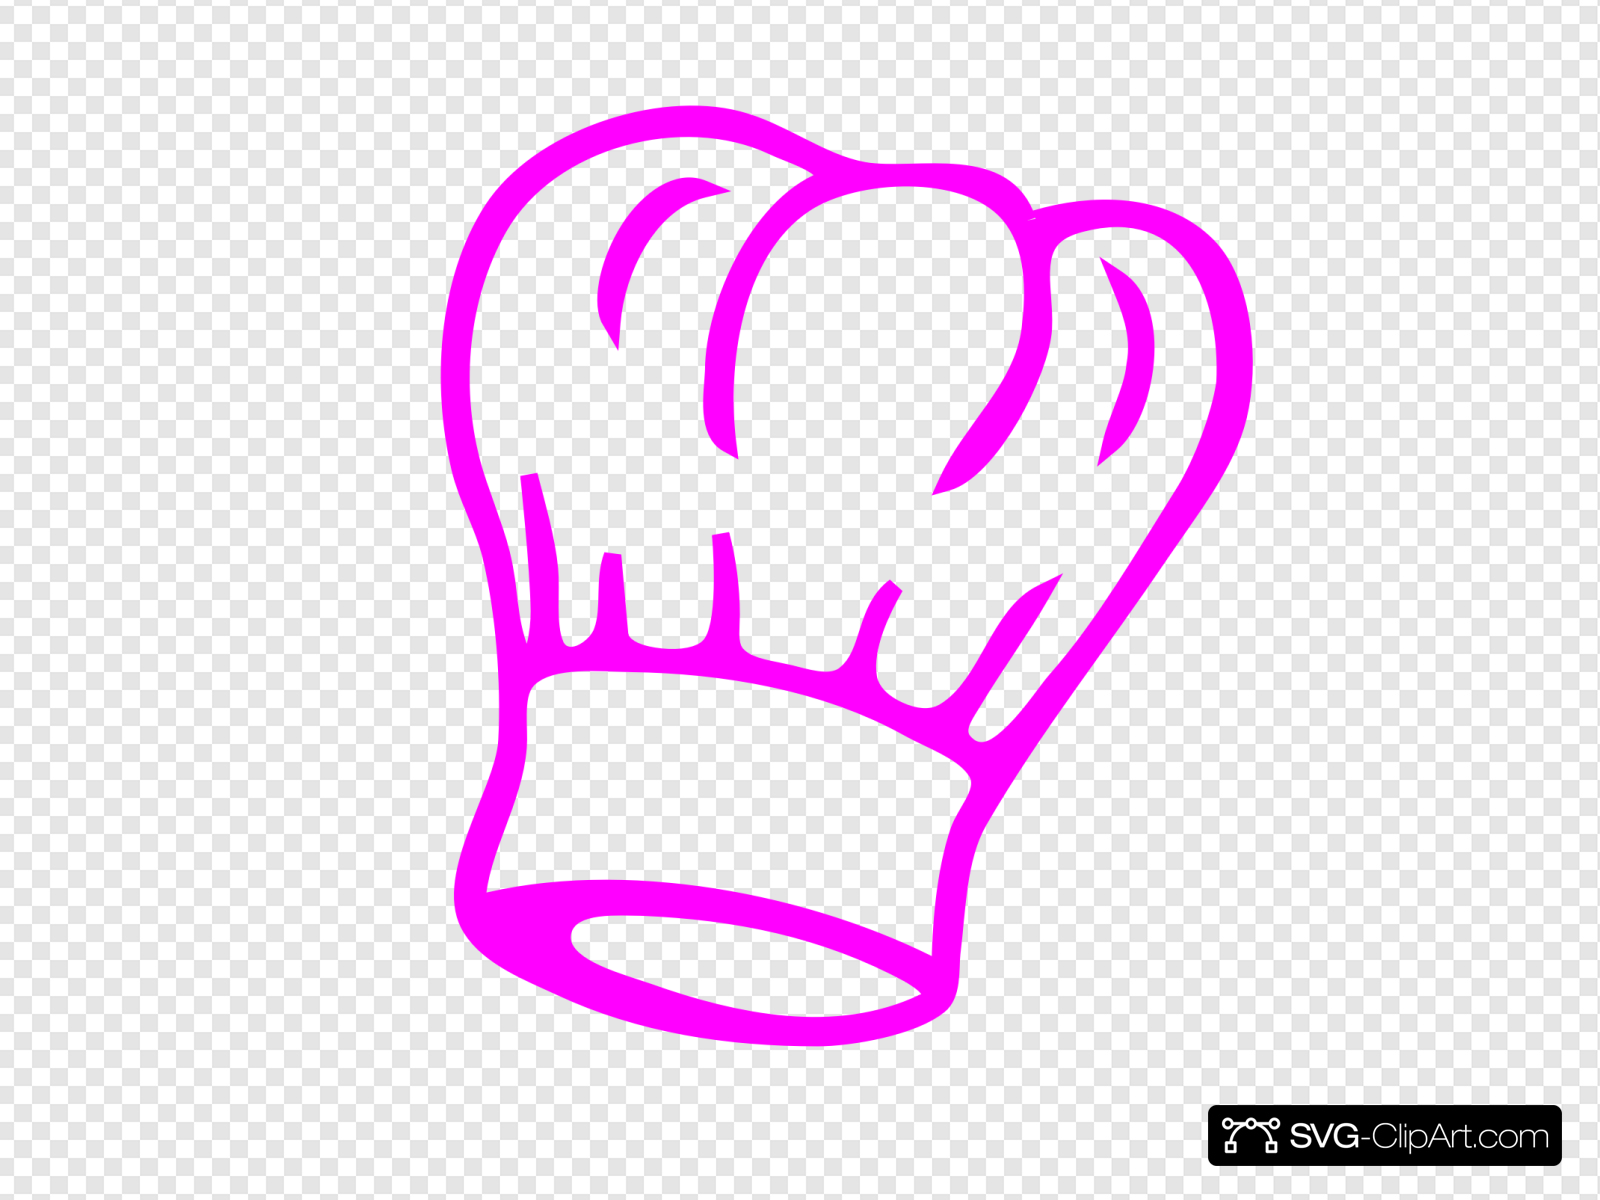 Pink Chef Hat Clip art, Icon and SVG.